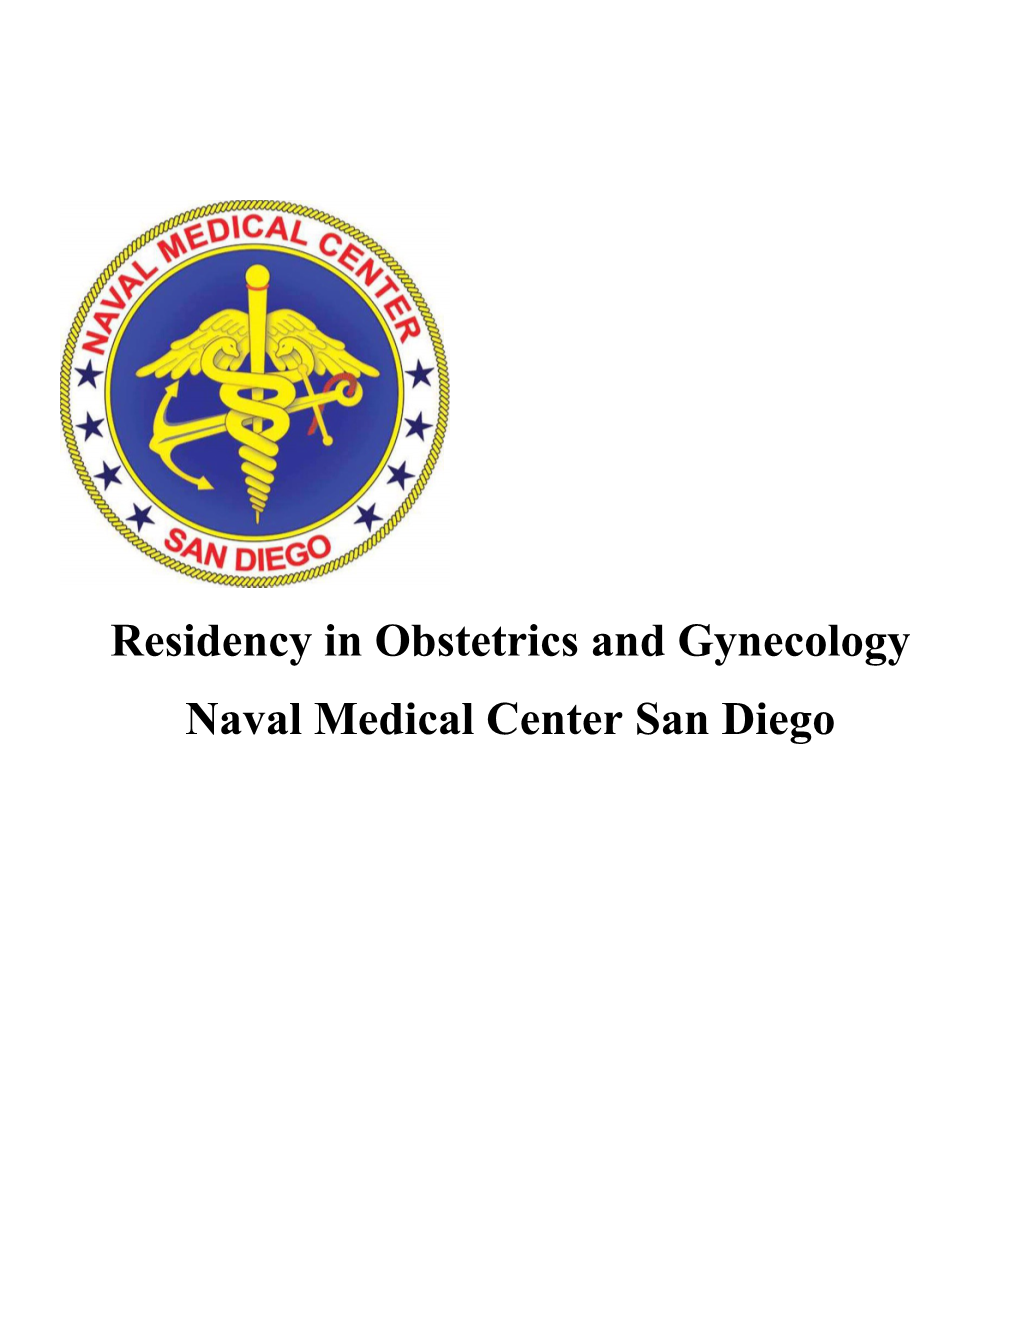 Residency in Obstetrics and Gynecology